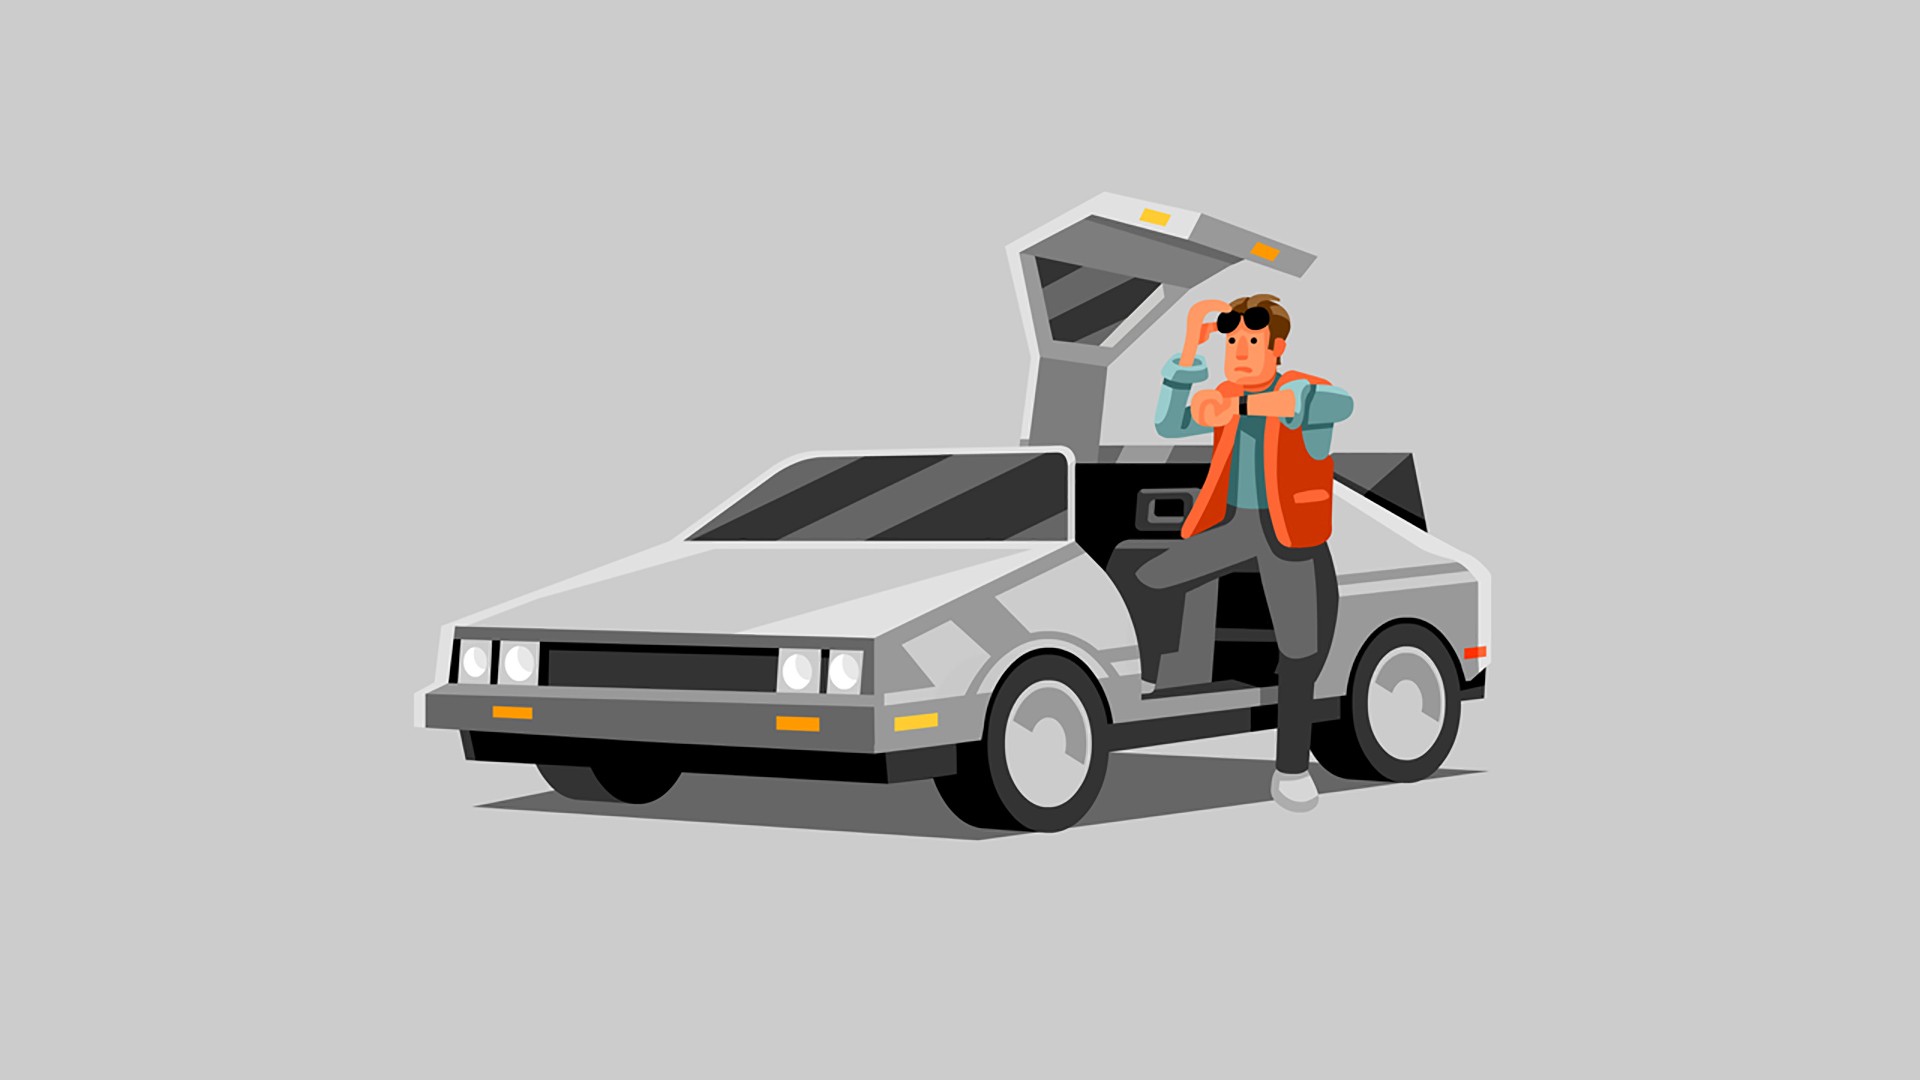 General 1920x1080 DeLorean Back to the Future movies Time Machine Marty McFly artwork car vehicle minimalism Movie Vehicles simple background gray gray background time travel CGI digital art